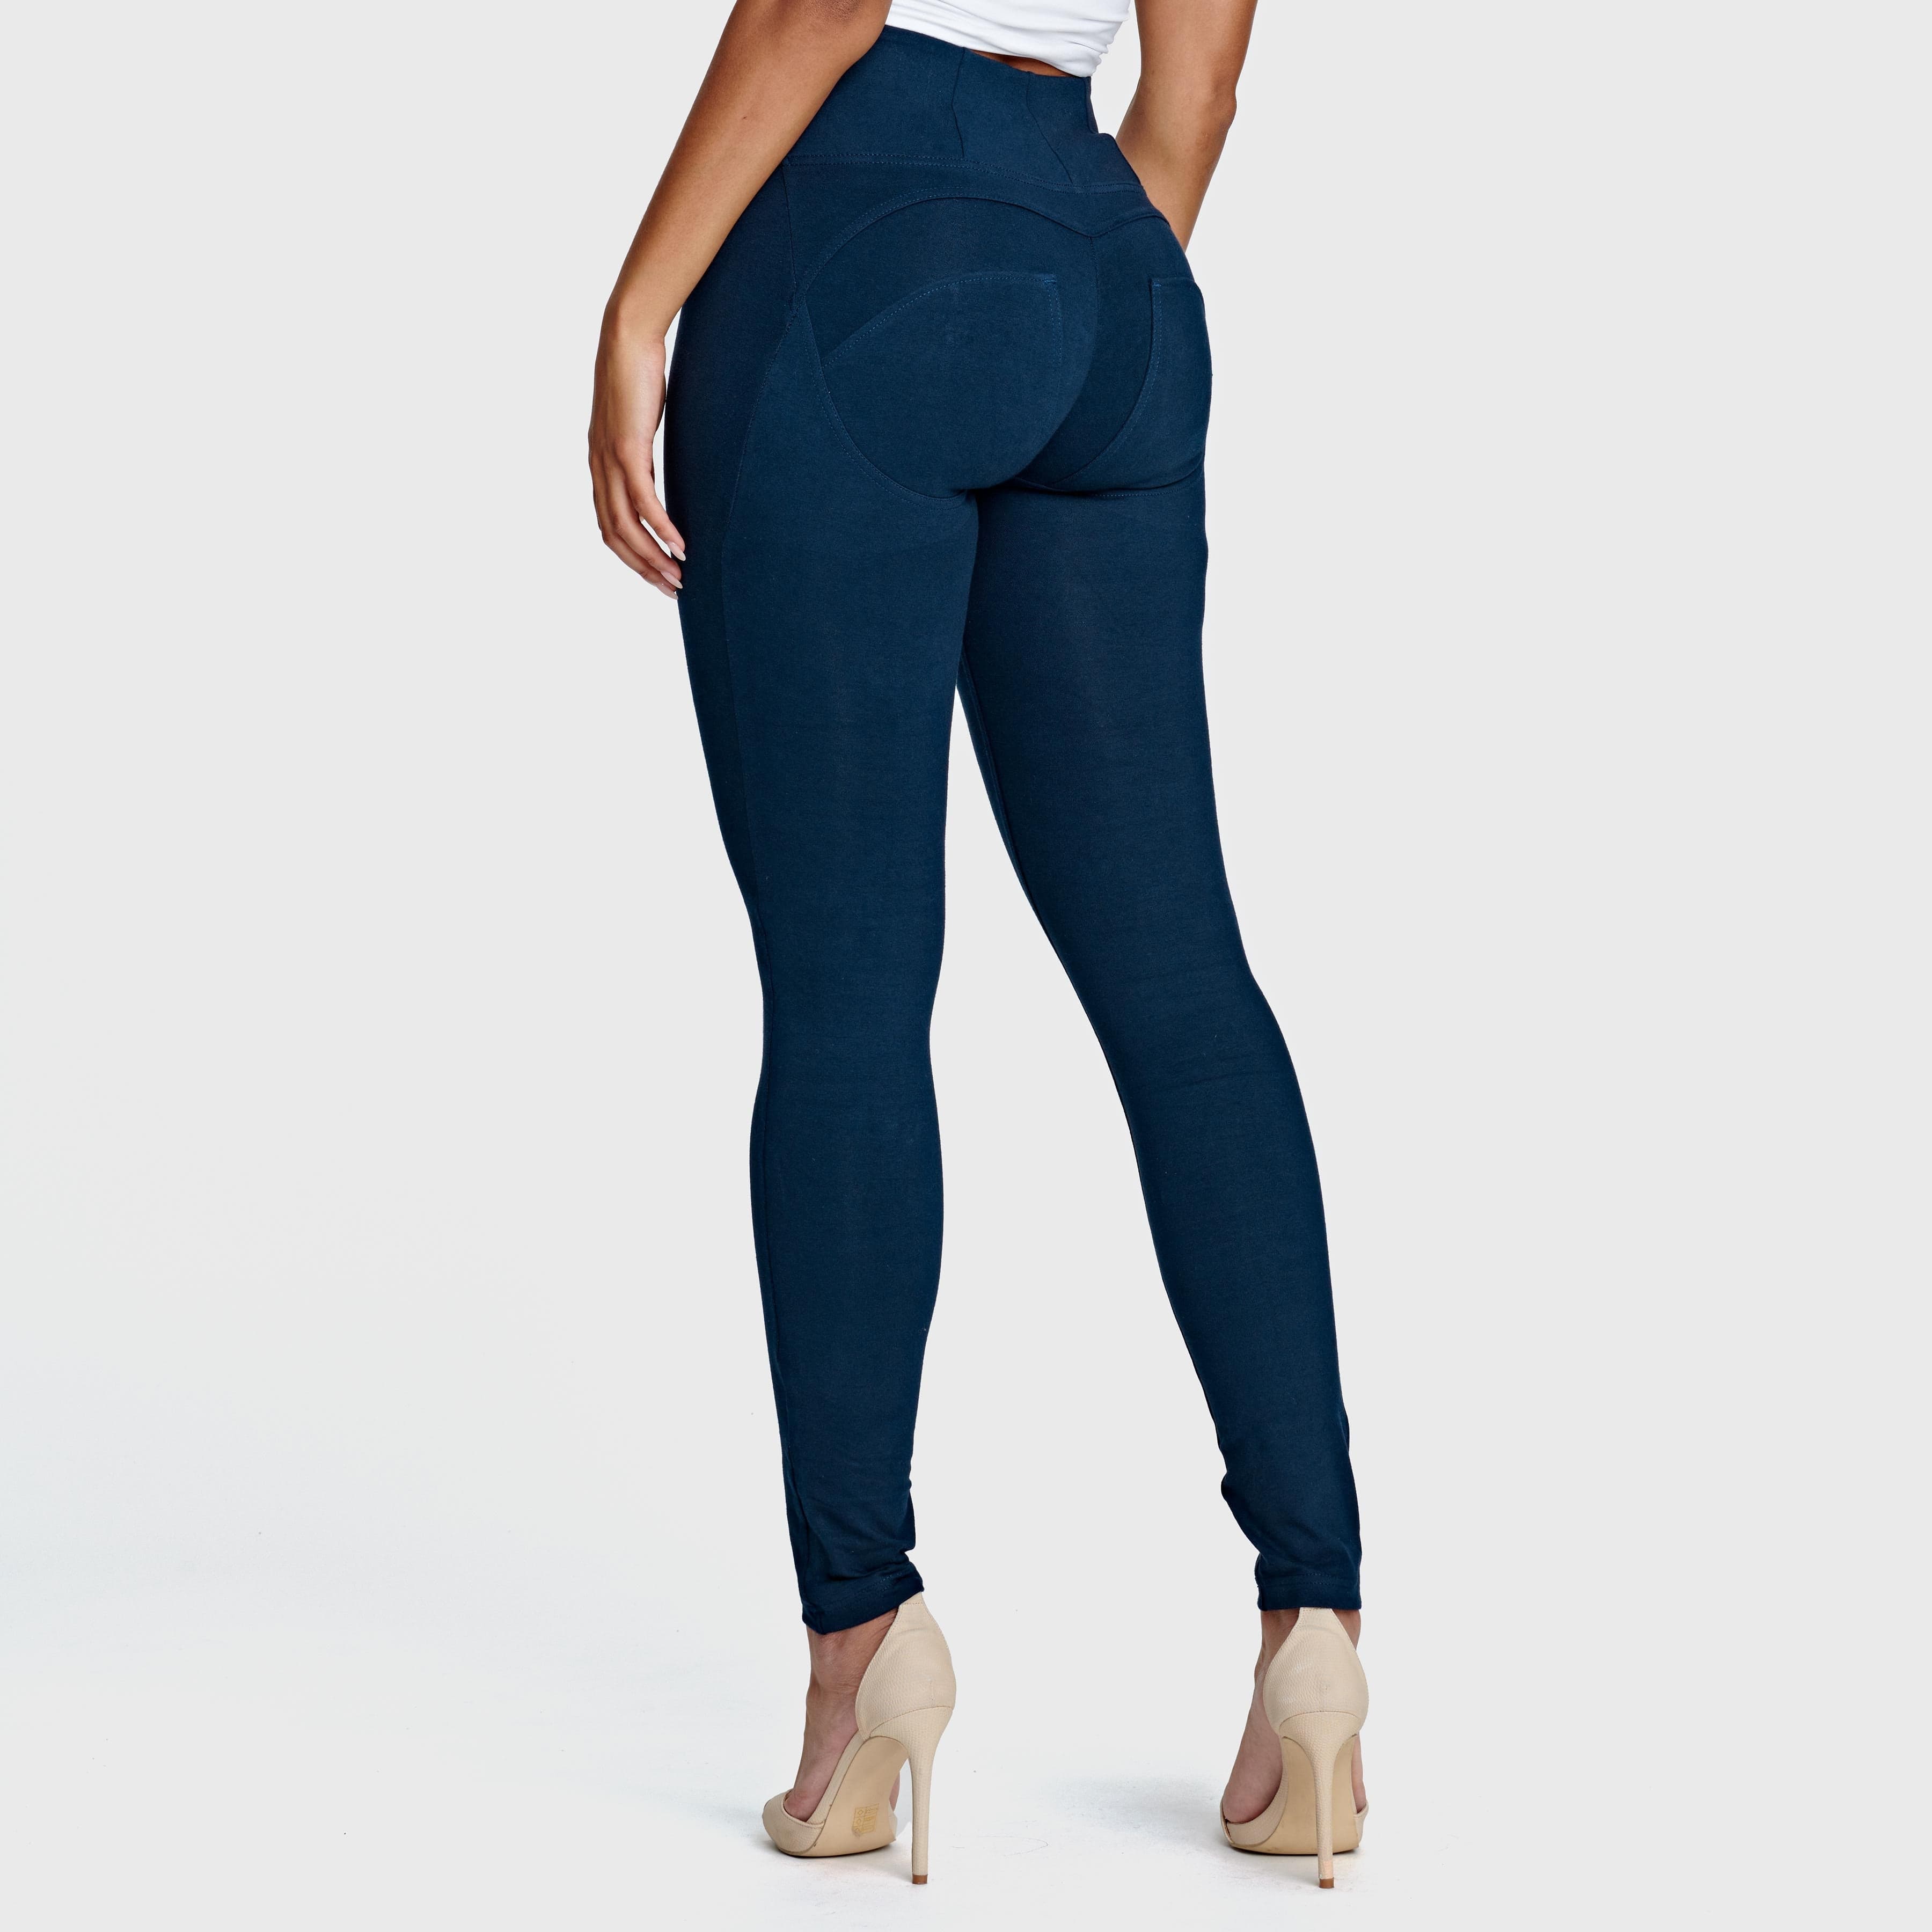 WR.UP® Fashion - High Waisted - Full Length - Navy Blue 3